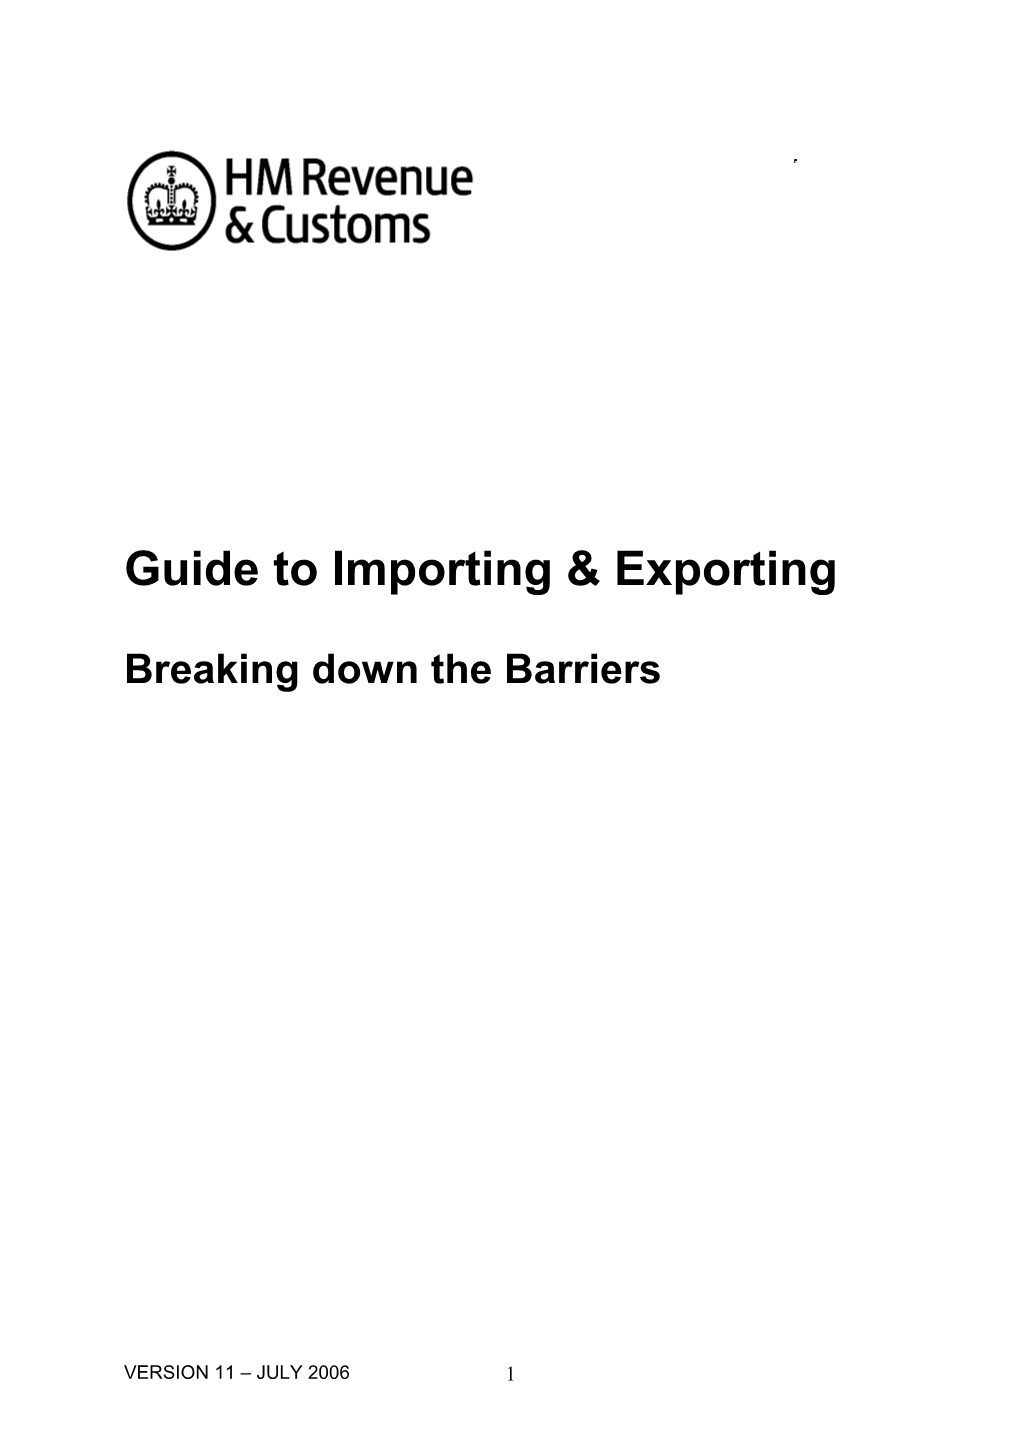 Guide to Importing & Exporting